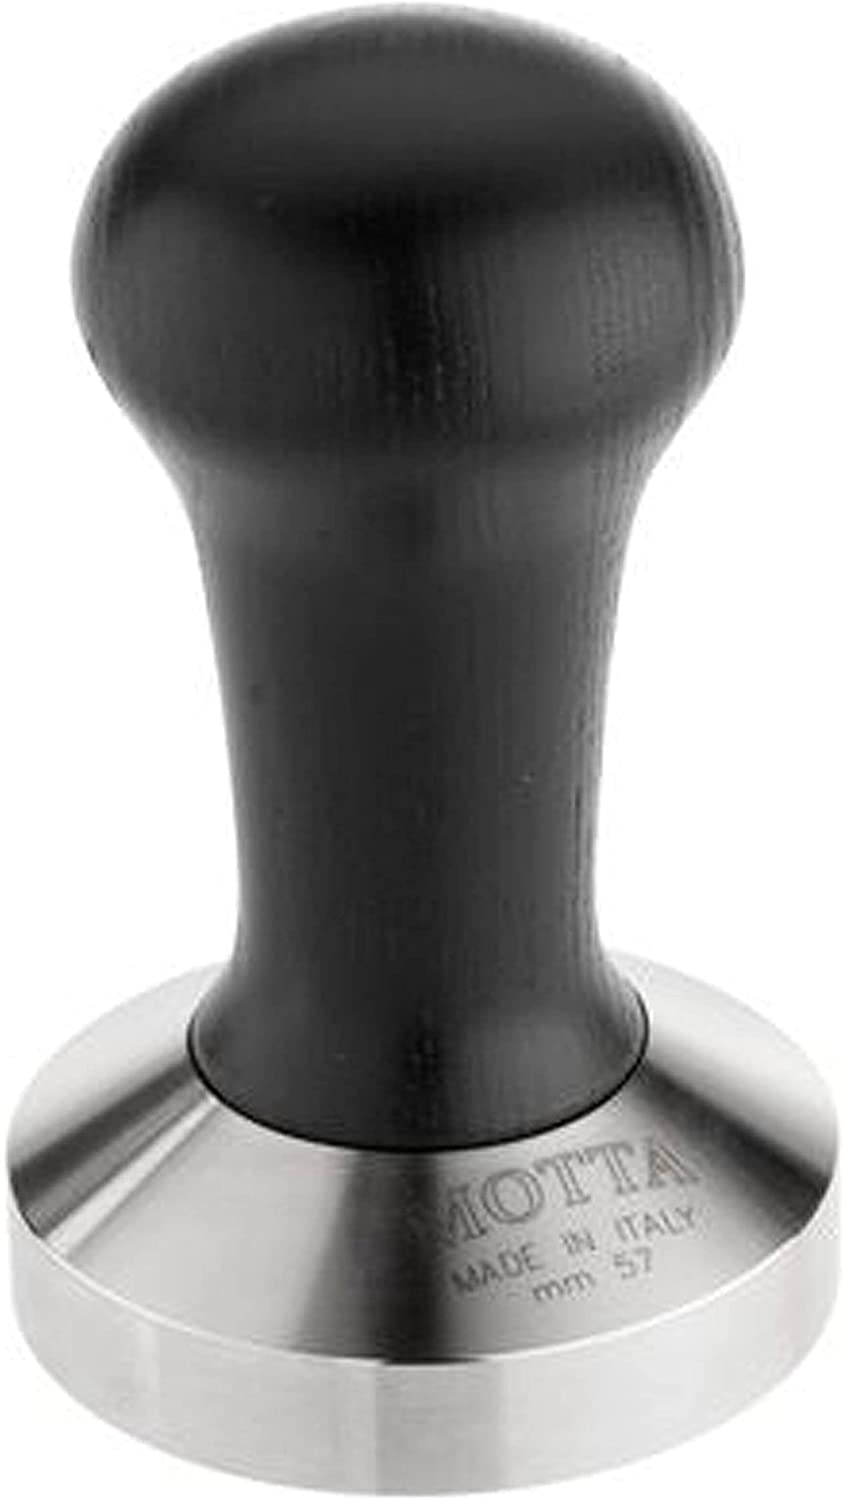 Motta Tamper Made of Stainless Steel With Wooden Handle | Planar, 49mm, Black